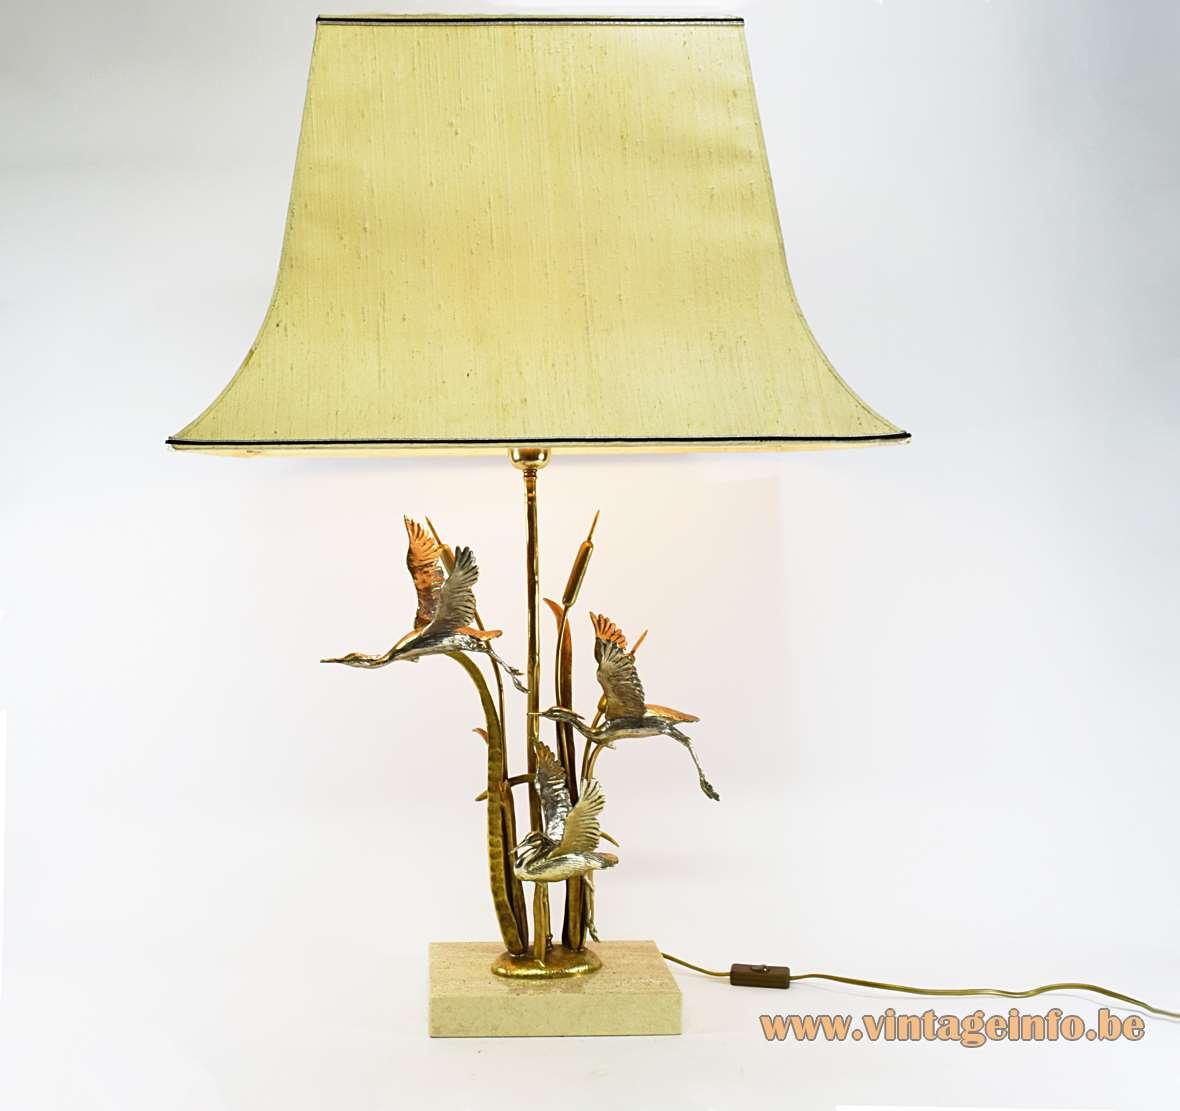 Herons & cattails table lamp travertine limestone base gilded & silver-plated metal birds pagoda lampshade 1970s L’Originale